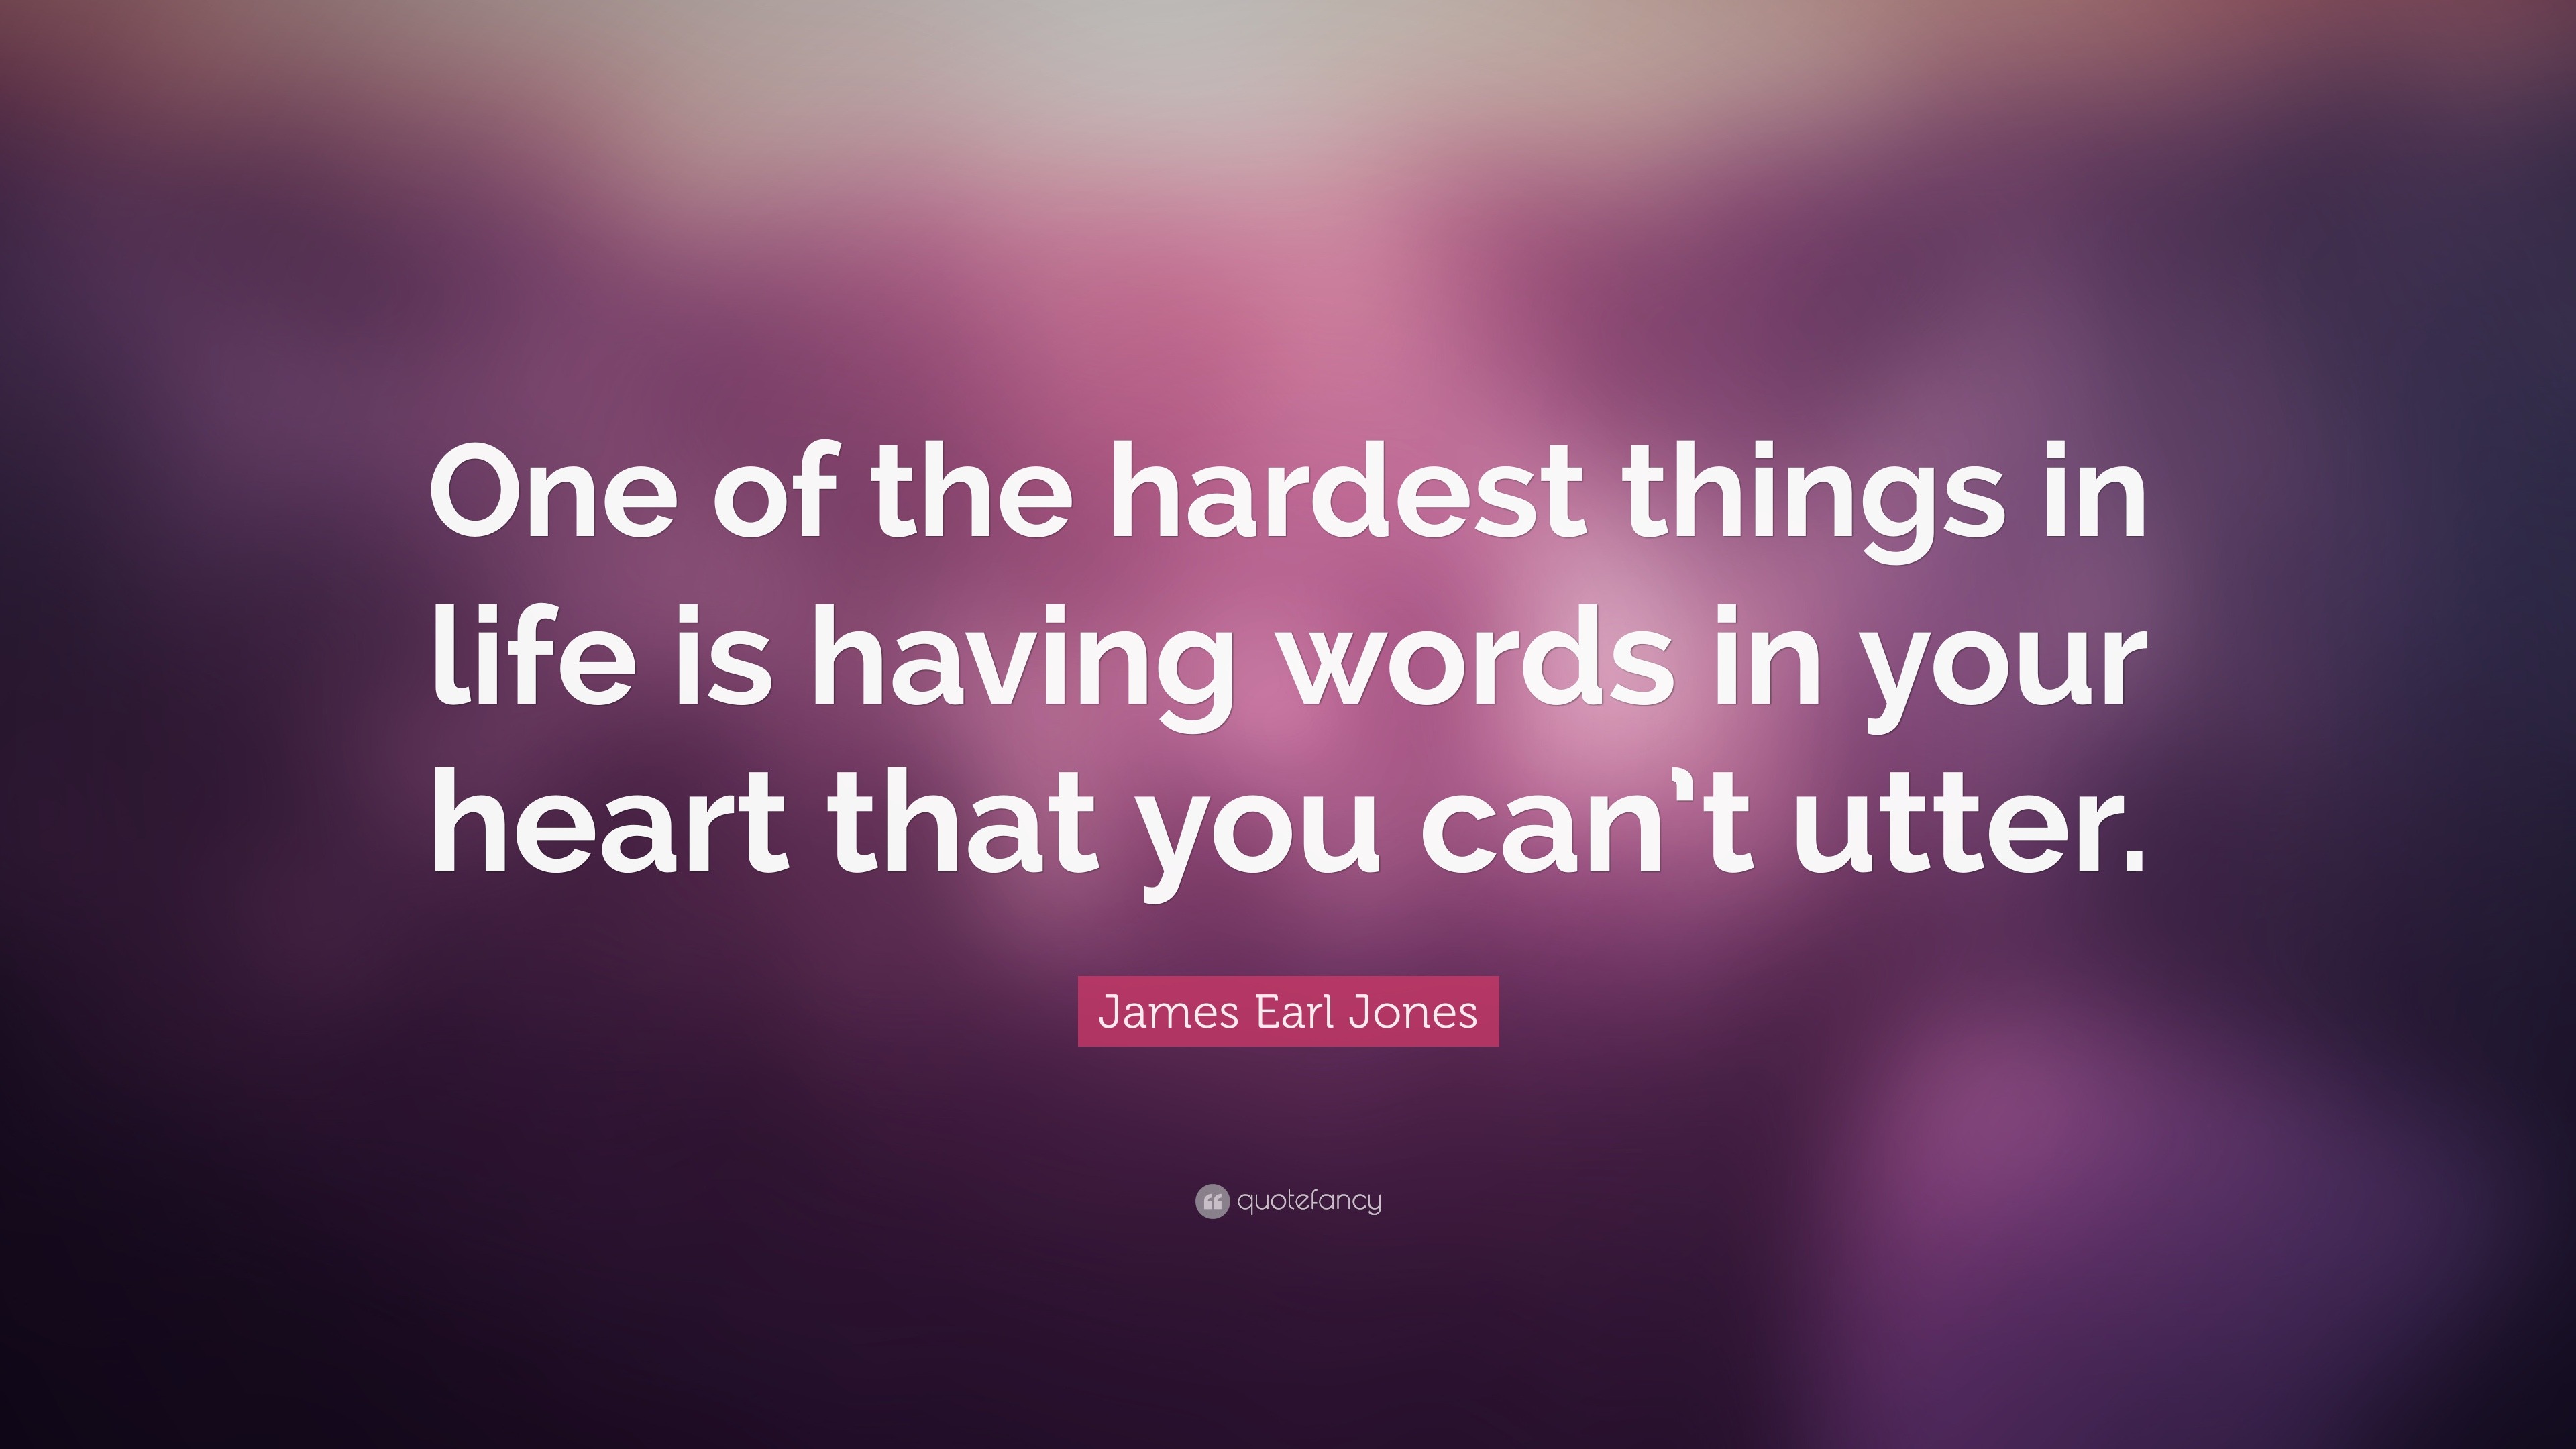 James Earl Jones Quote: “One of the hardest things in life is having ...